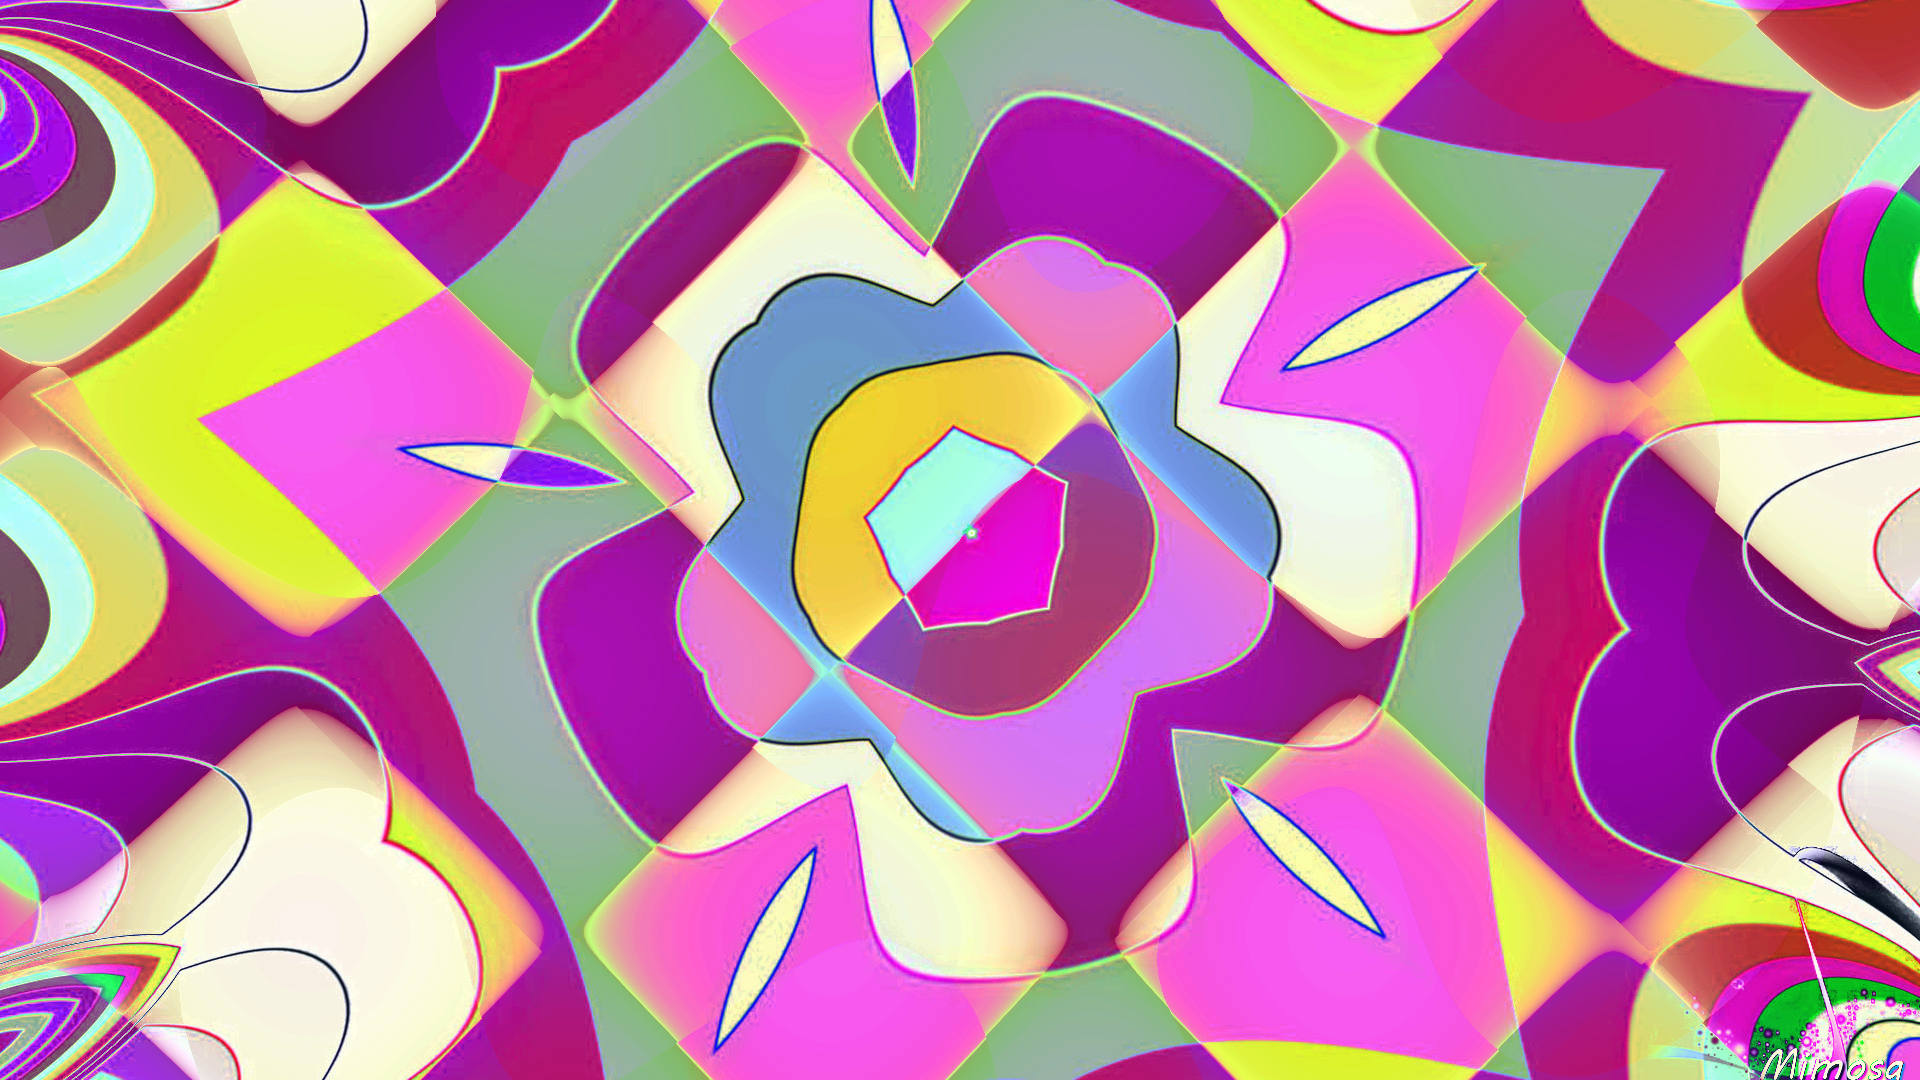 Abstract Colorful Digital Art Geometry Shapes 1920x1080